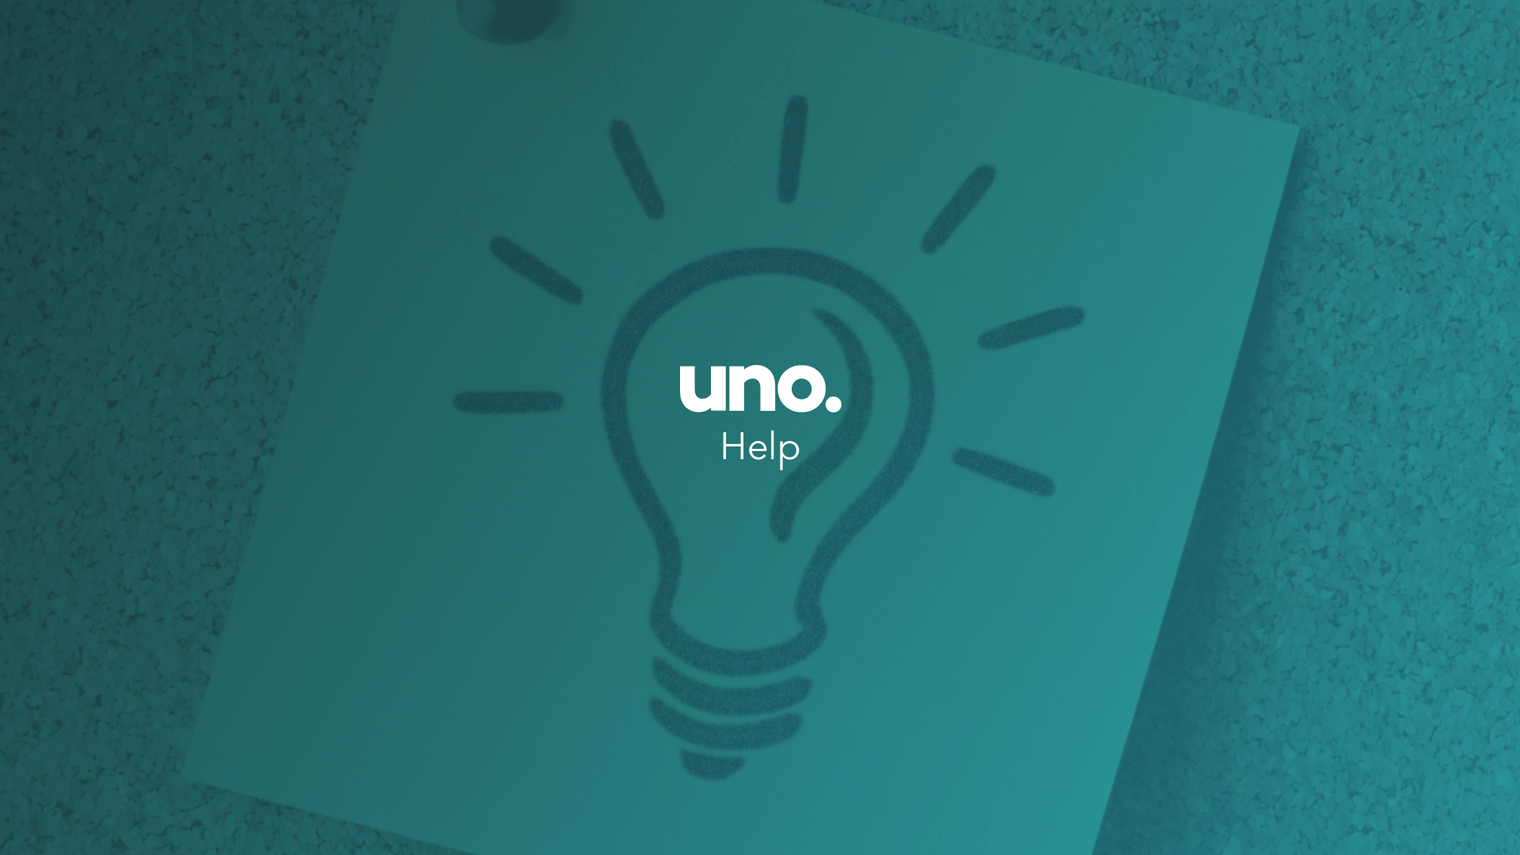 Does uno offer home loans for those who are self-employed?